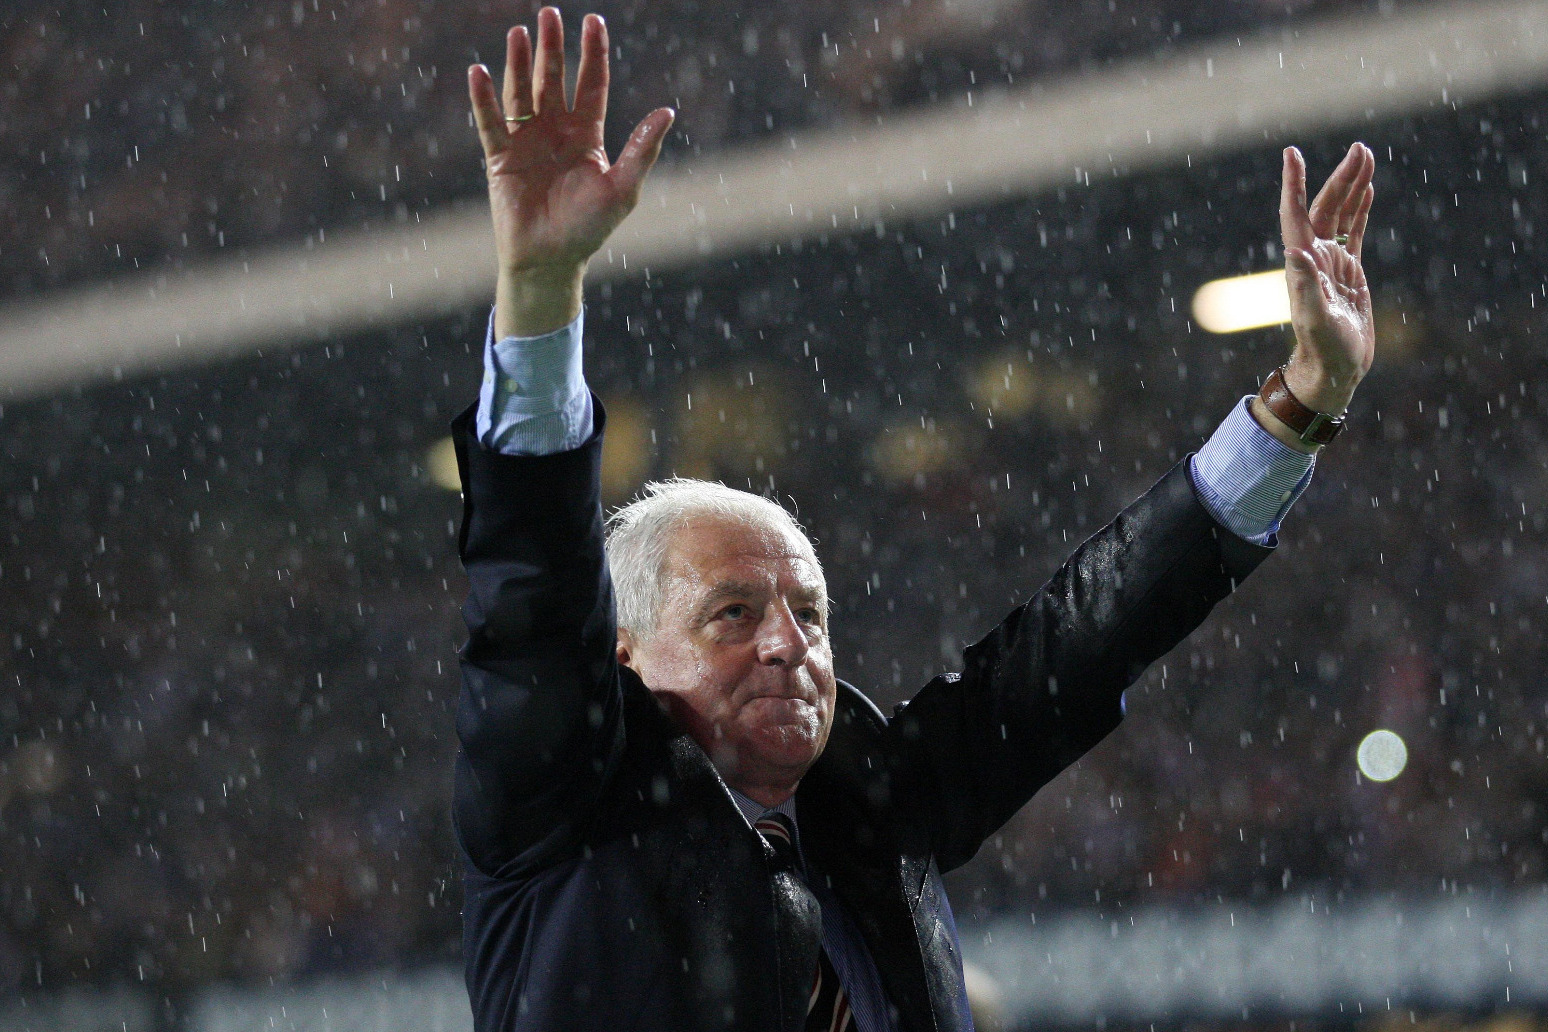 Former Rangers, Everton and Scotland boss Walter Smith dies aged 73 